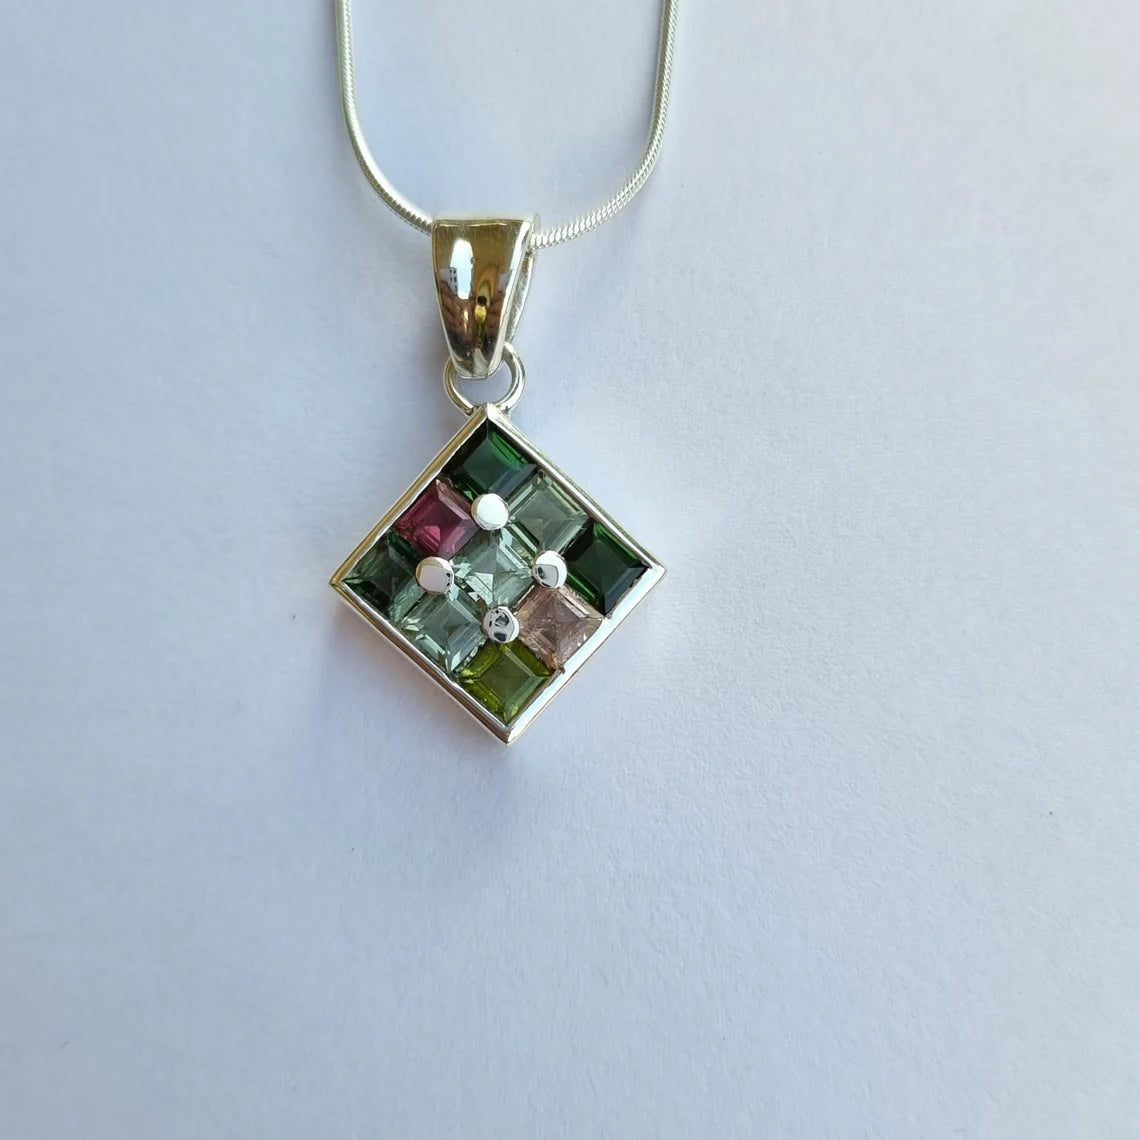 Natural Green Tourmaline Pendant, 925 Sterling Silver Tourmaline Gemstone pendant, Multi Tourmaline Silver Necklace